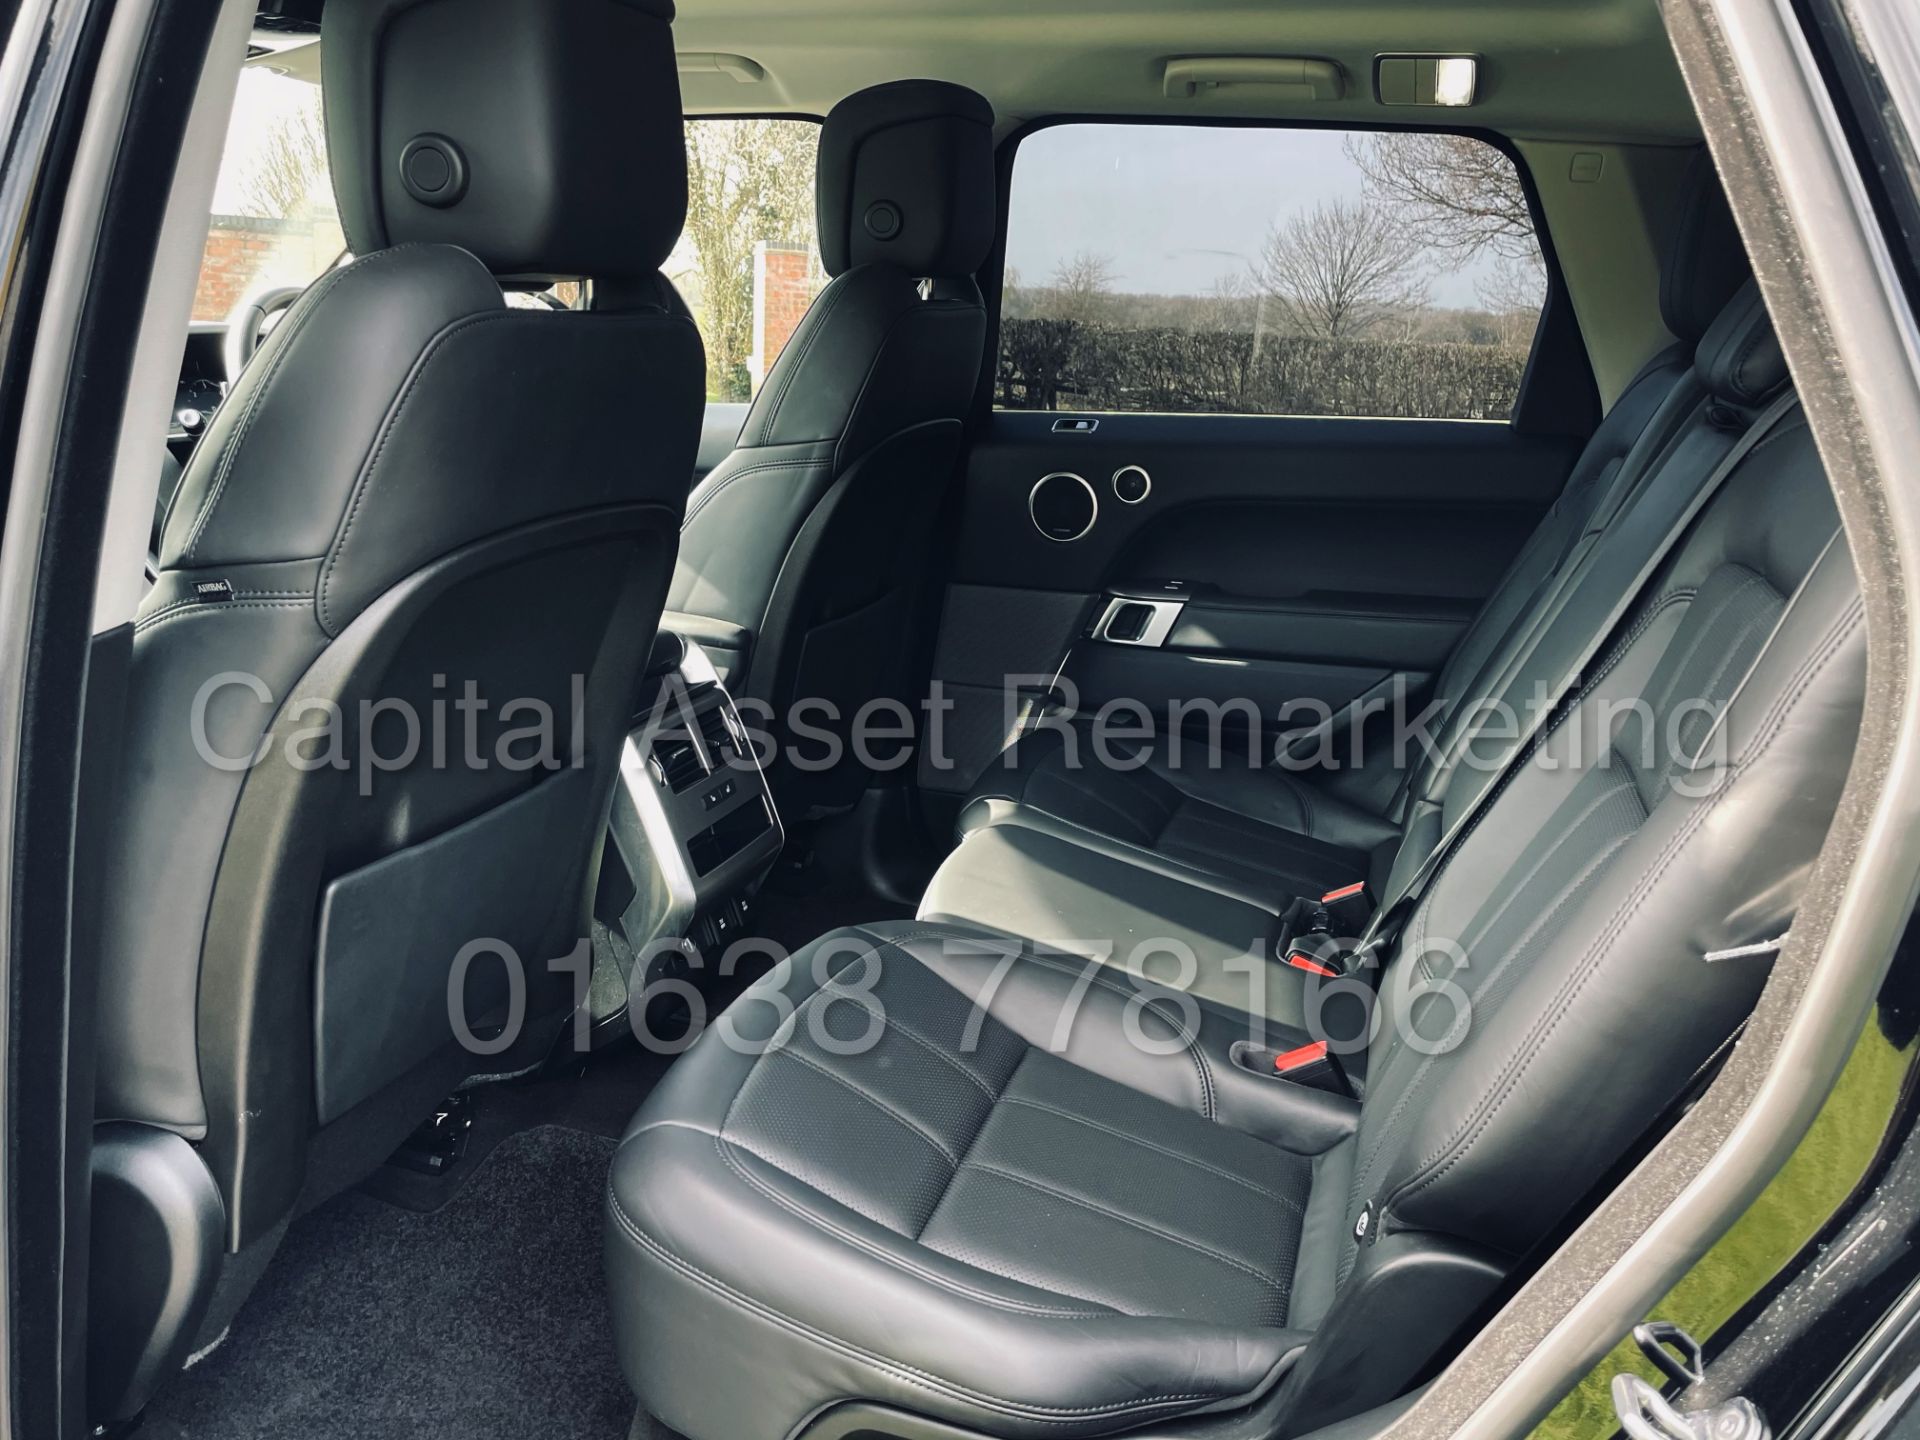 RANGE ROVER SPORT *HSE EDITION* SUV (2018 - NEW MODEL) '8 SPEED AUTO - LEATHER - NAV' *FULLY LOADED* - Image 26 of 55